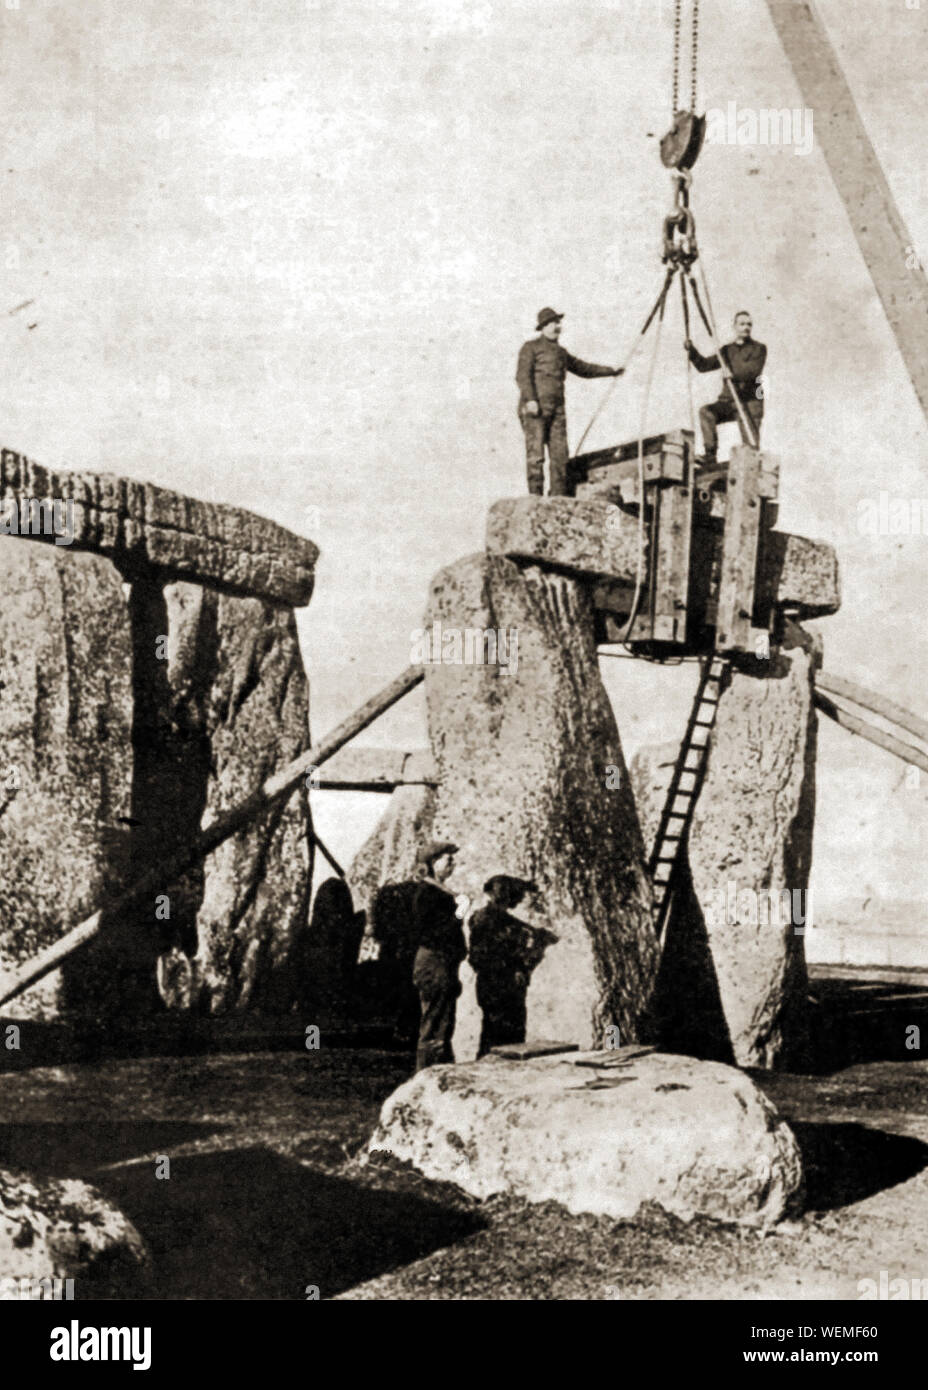 Stonehenge  - Repairs / reconstruction to the ancient Wiltshire  monument  .  Replacing a cross stone or lintel. One of the many repairs and reconstructions that have taken place between the 1920's and 1960's. Stock Photo